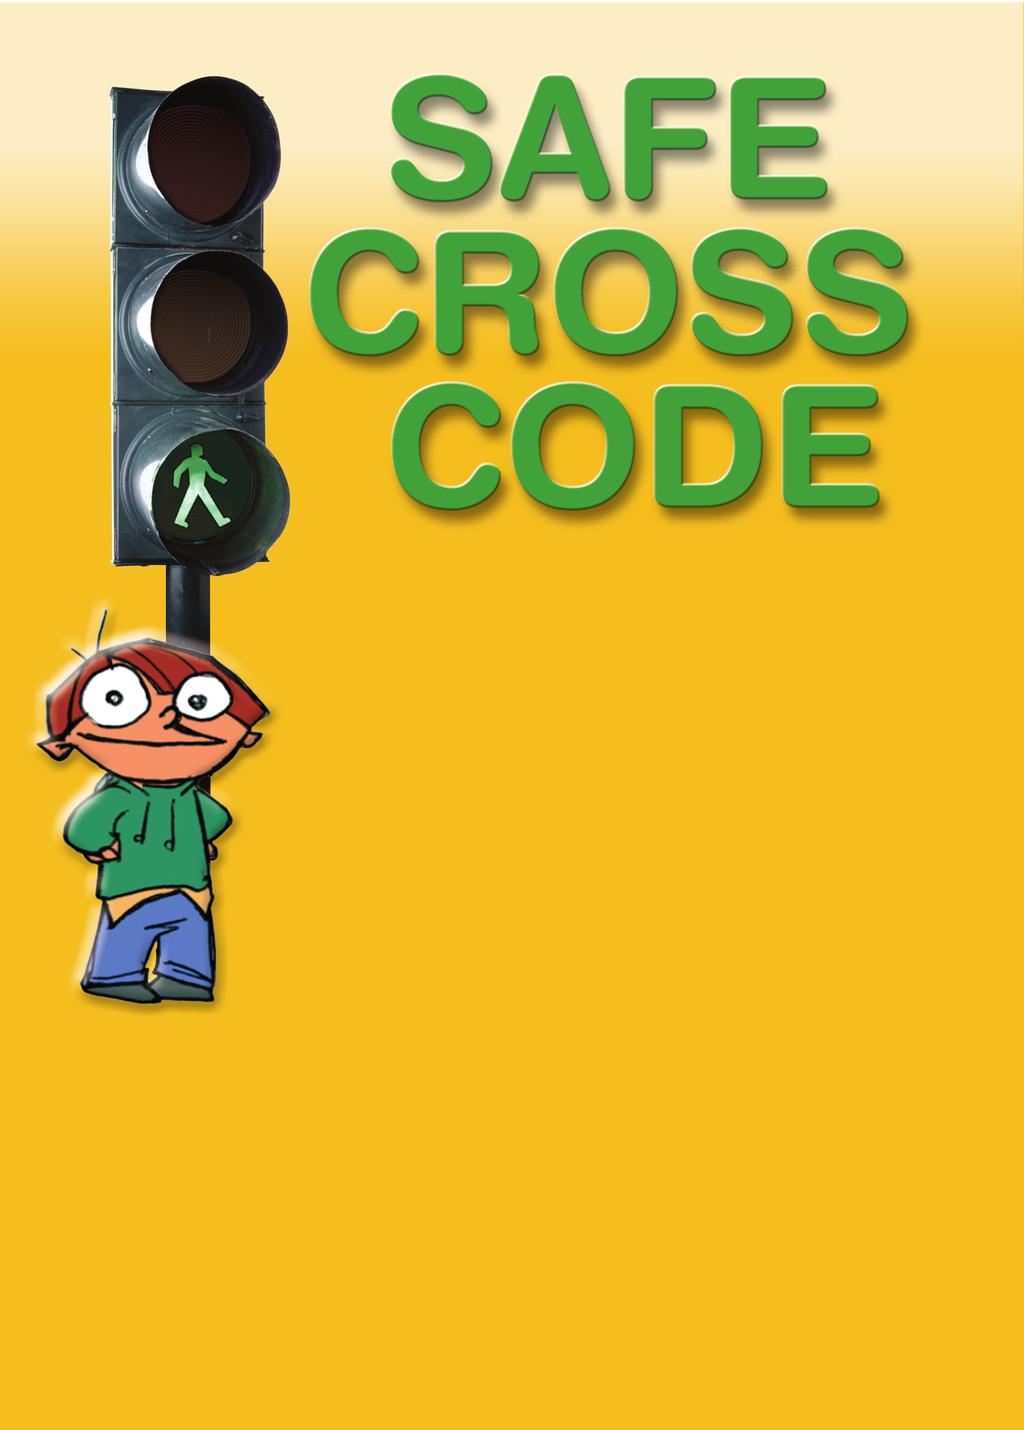 1 2 3 4 Hi, I m Mark and when I cross the road, I remember the Safe Cross Code. You should use it too!